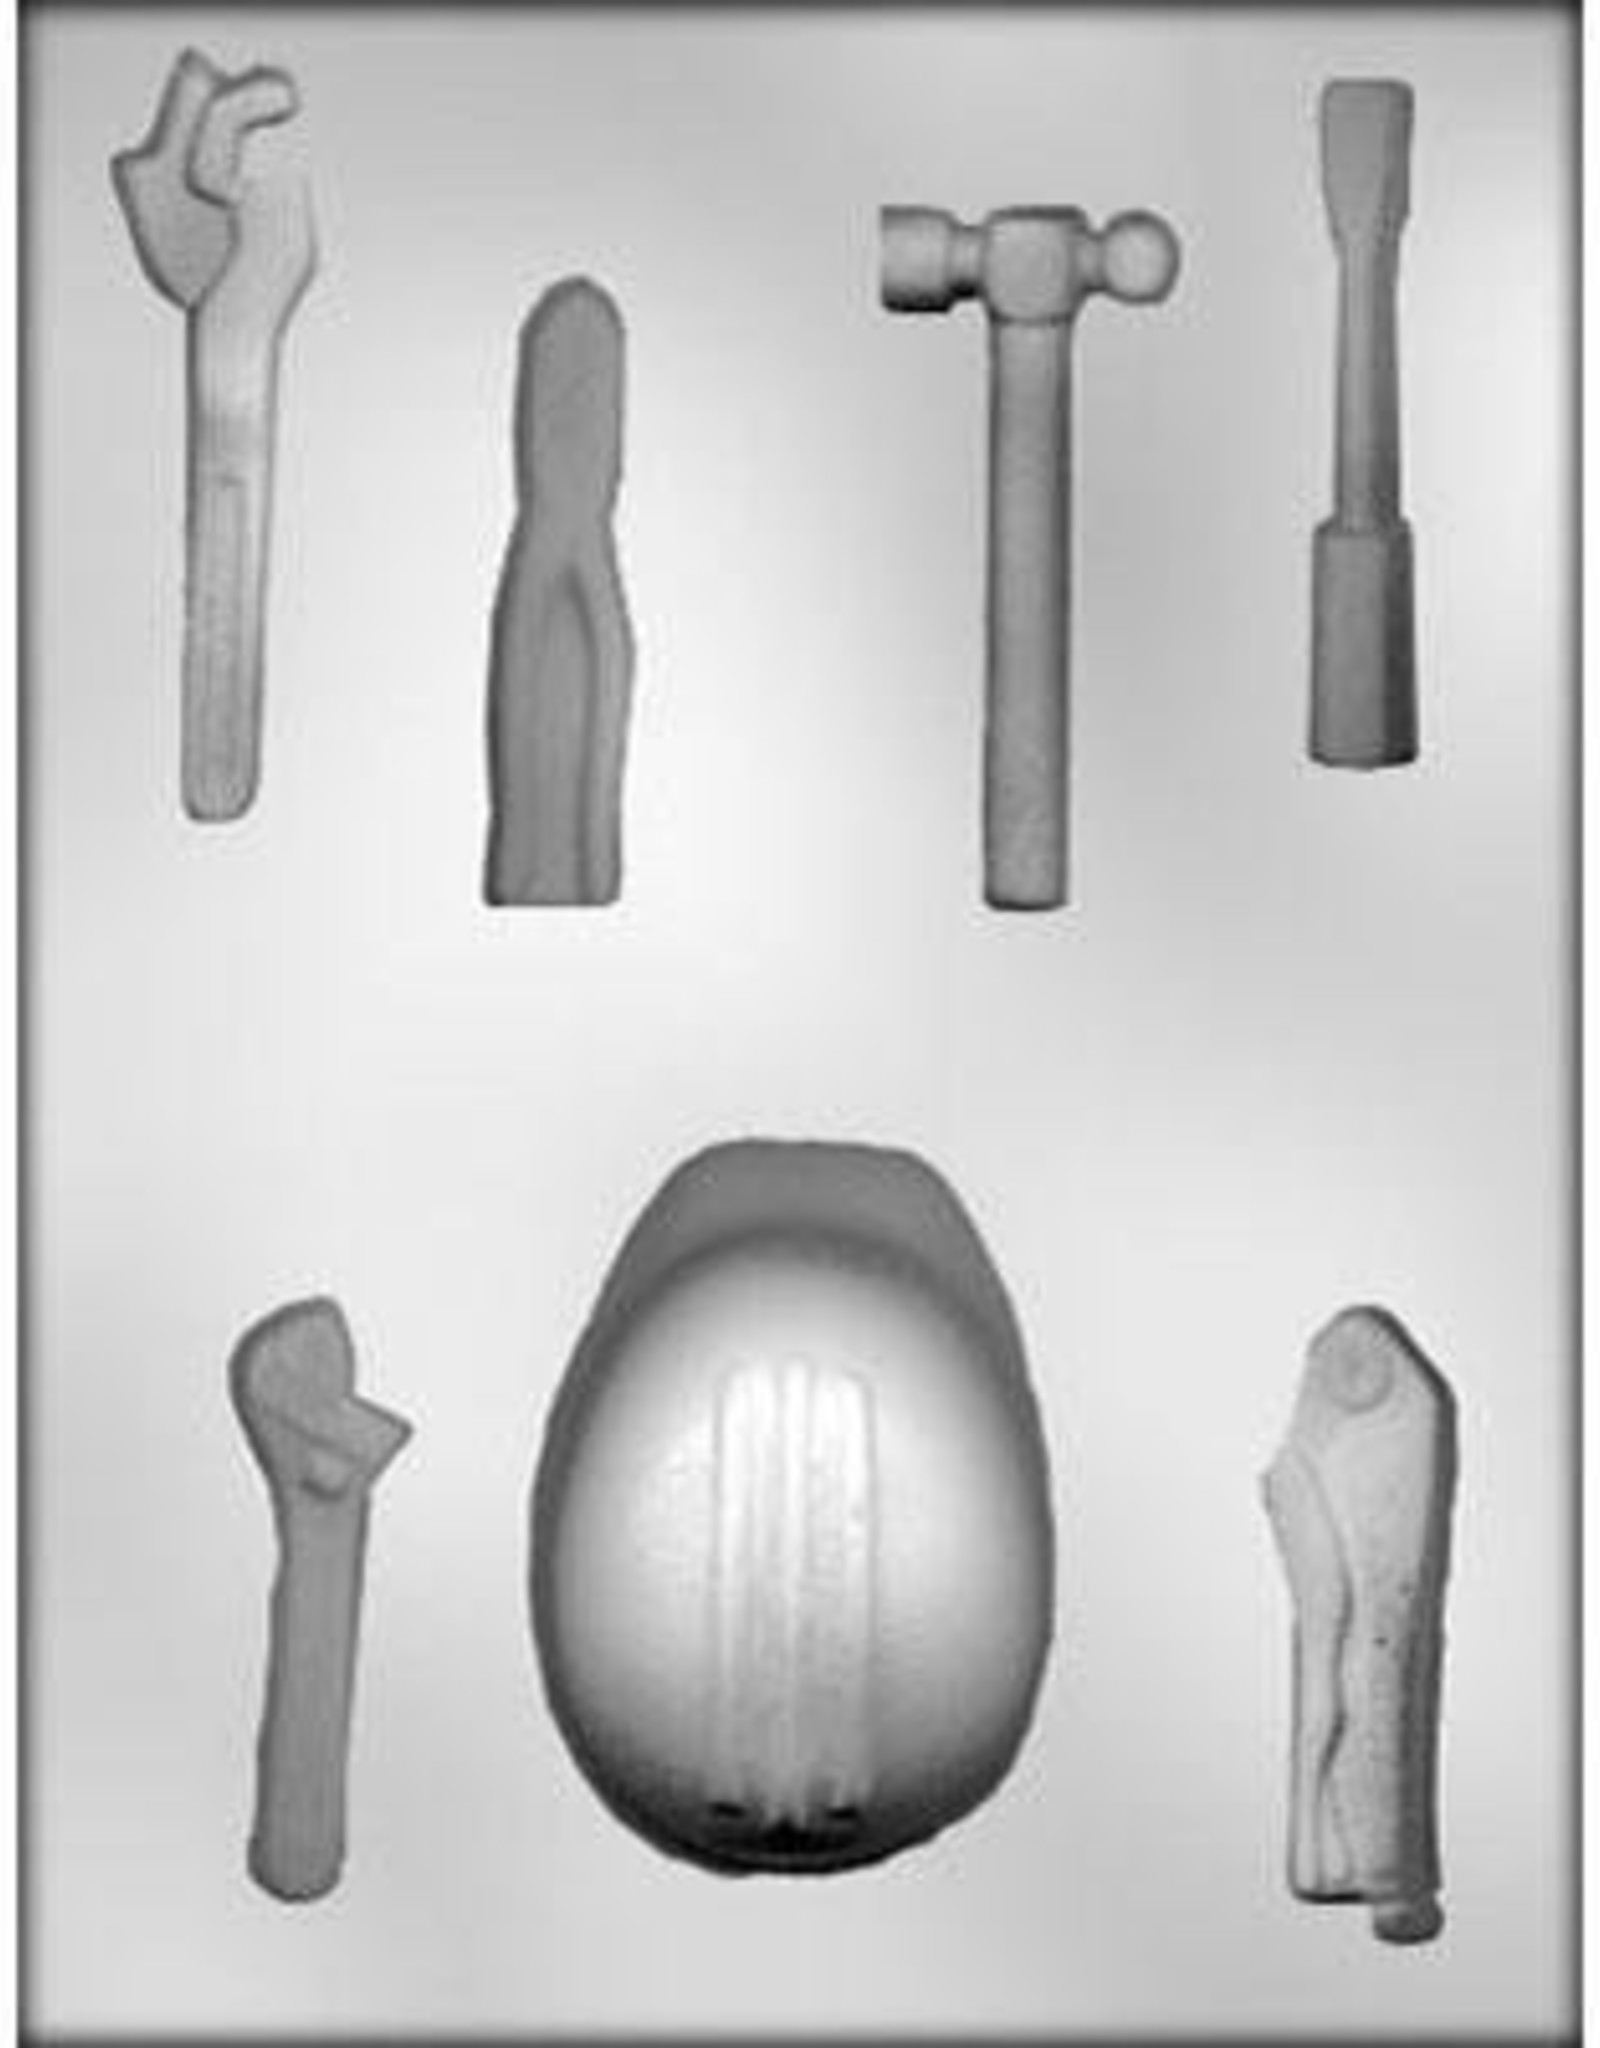 Hard Hat W/Tools Asst. Chocolate Candy Mold